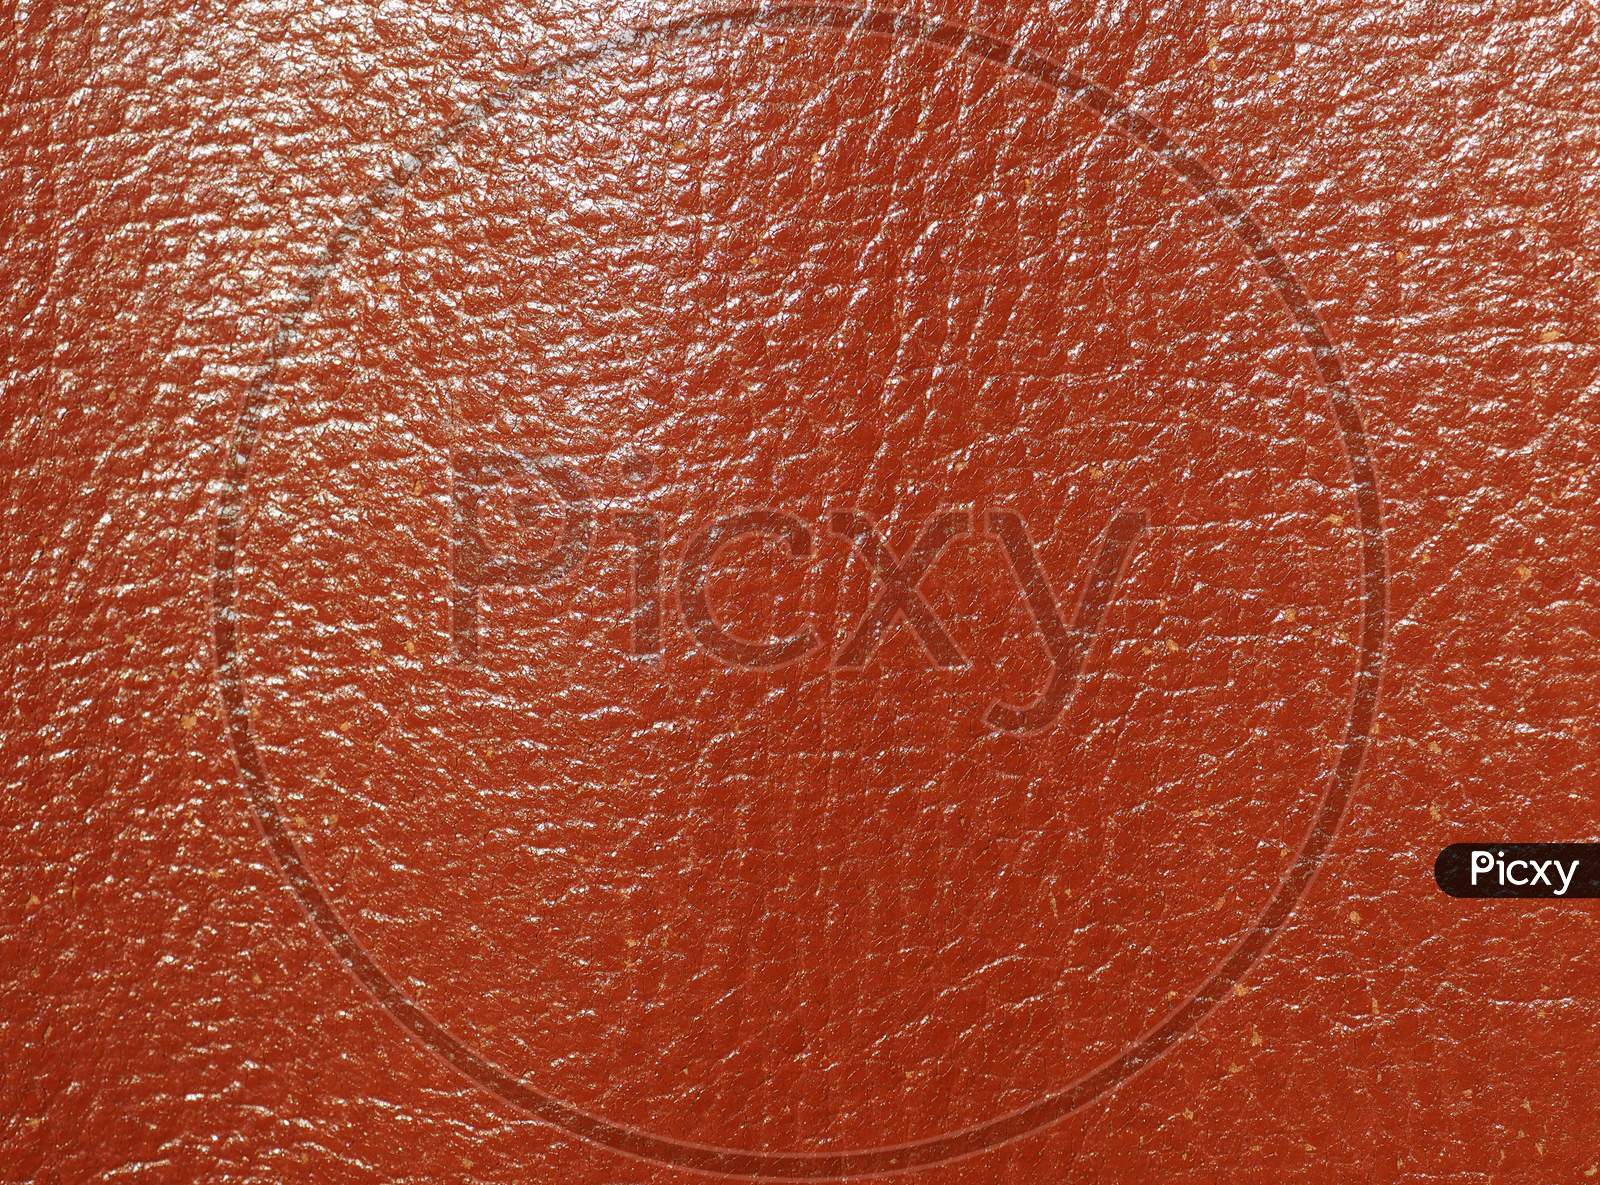 Brown Leatherette Texture Background